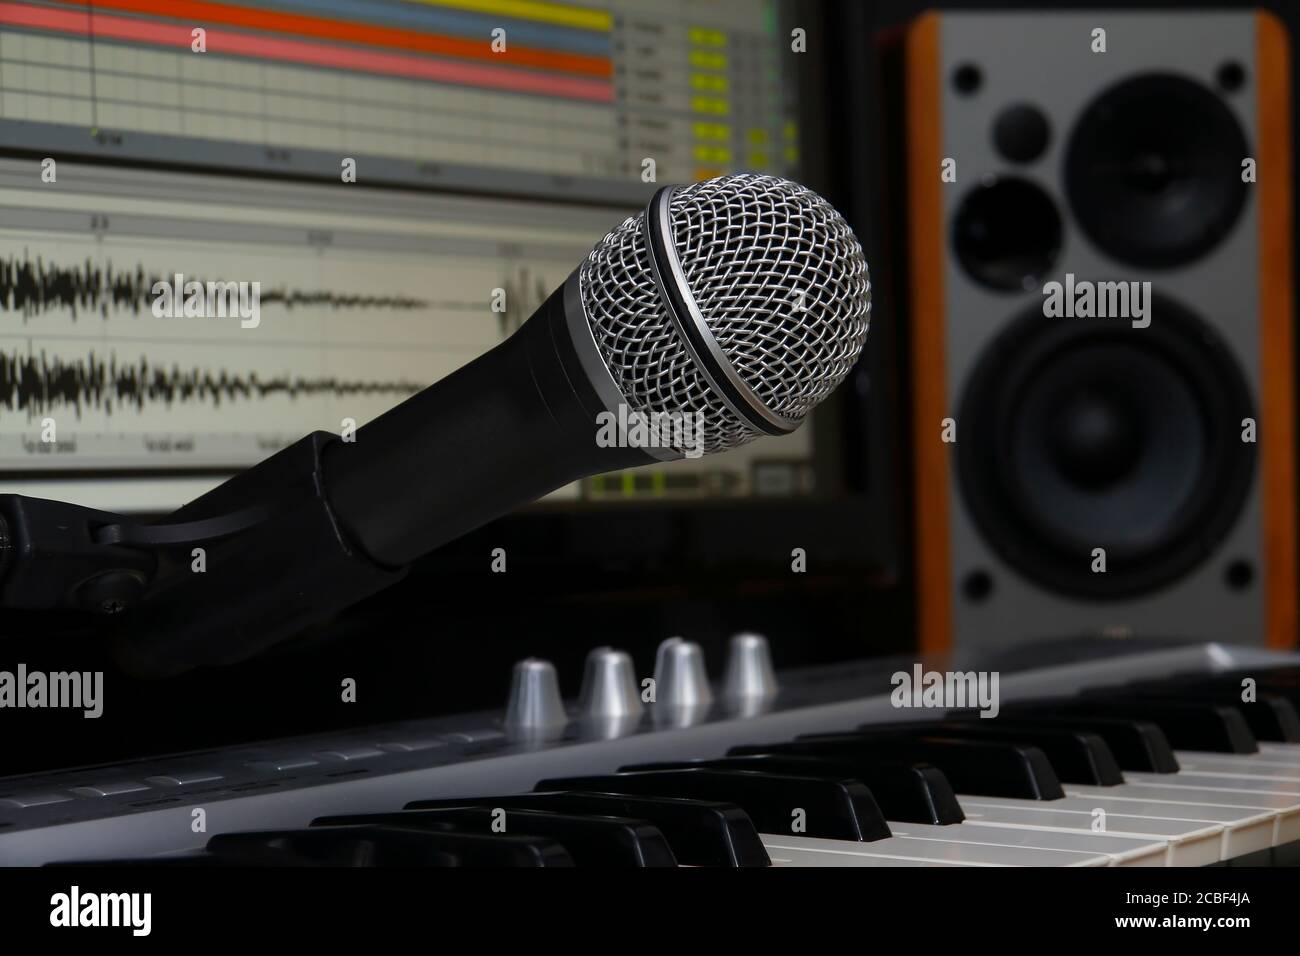 home recording studio. Screen keyboard, speakers and microphone. Stock Photo